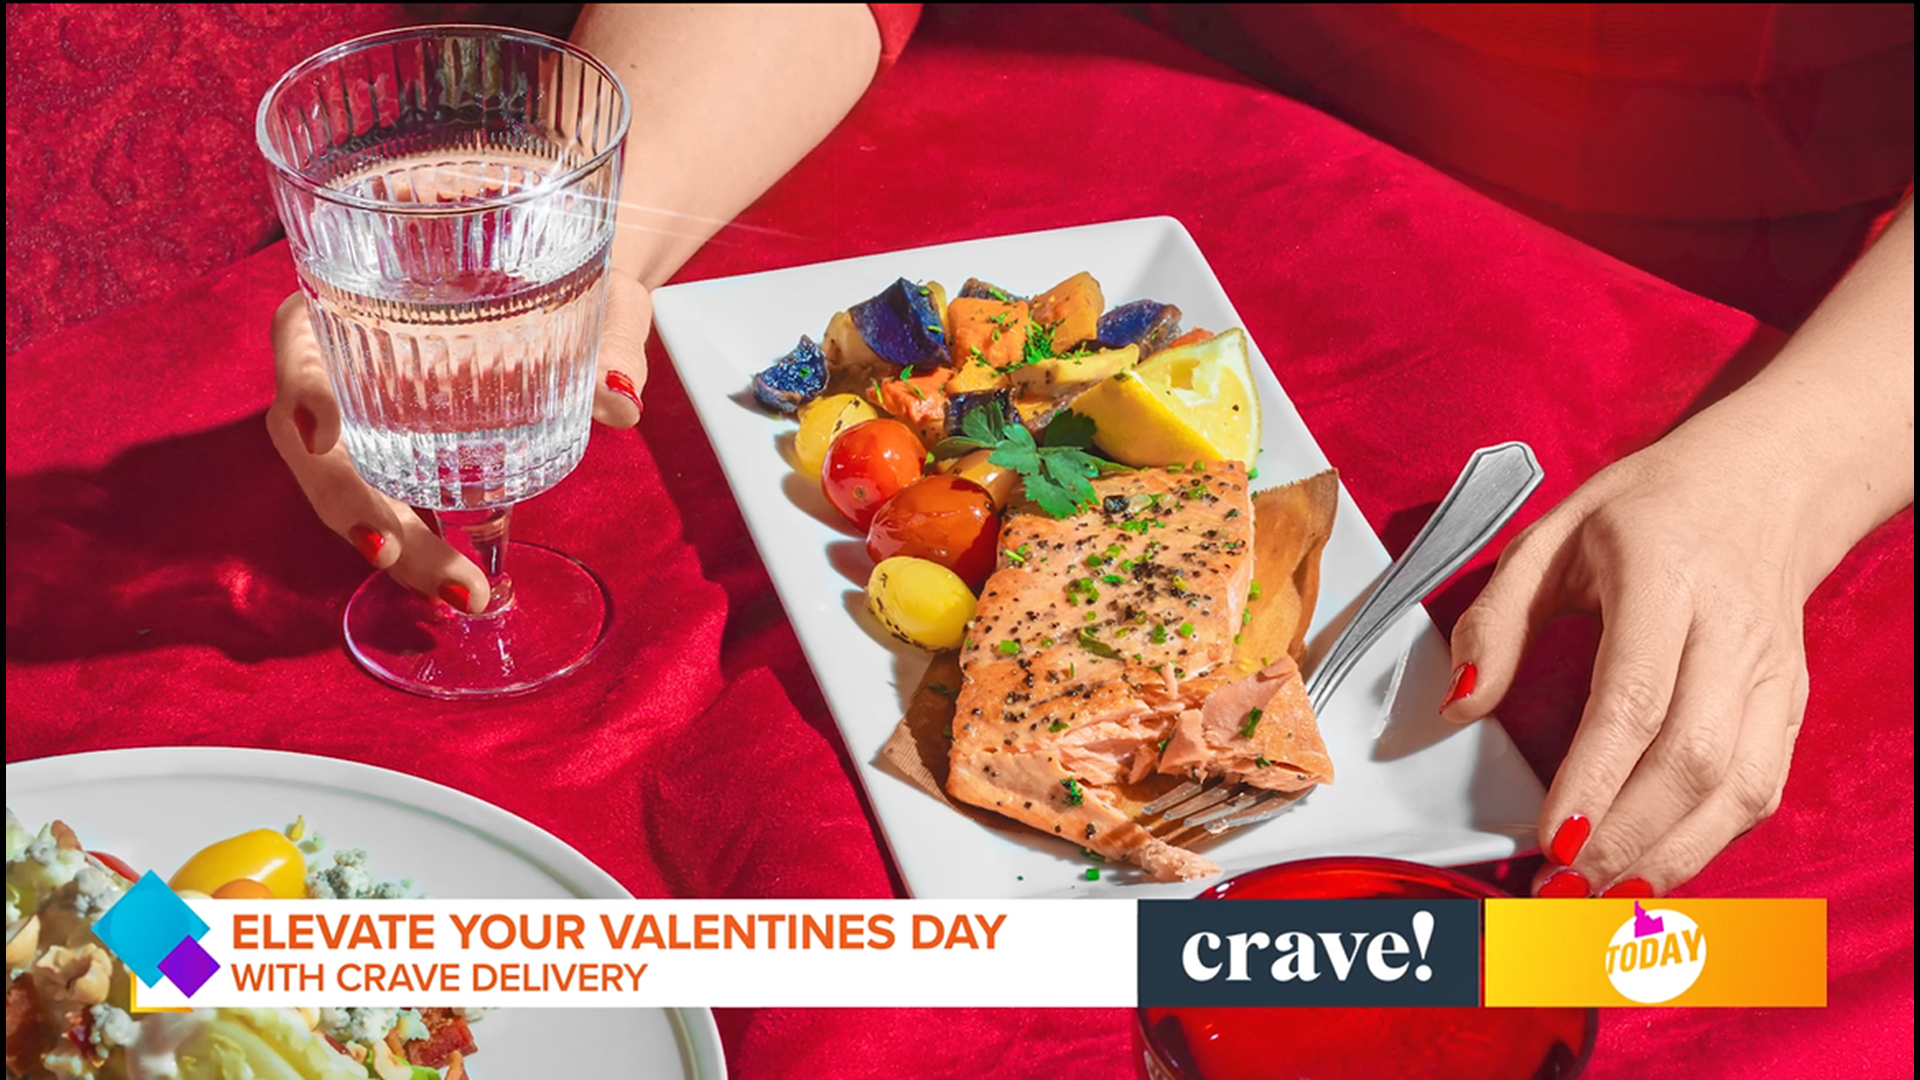 Shannon Reilly with Crave! Delivery shares with us special offers for Valentine's Day! www.cravedelivery.com/valentines-day